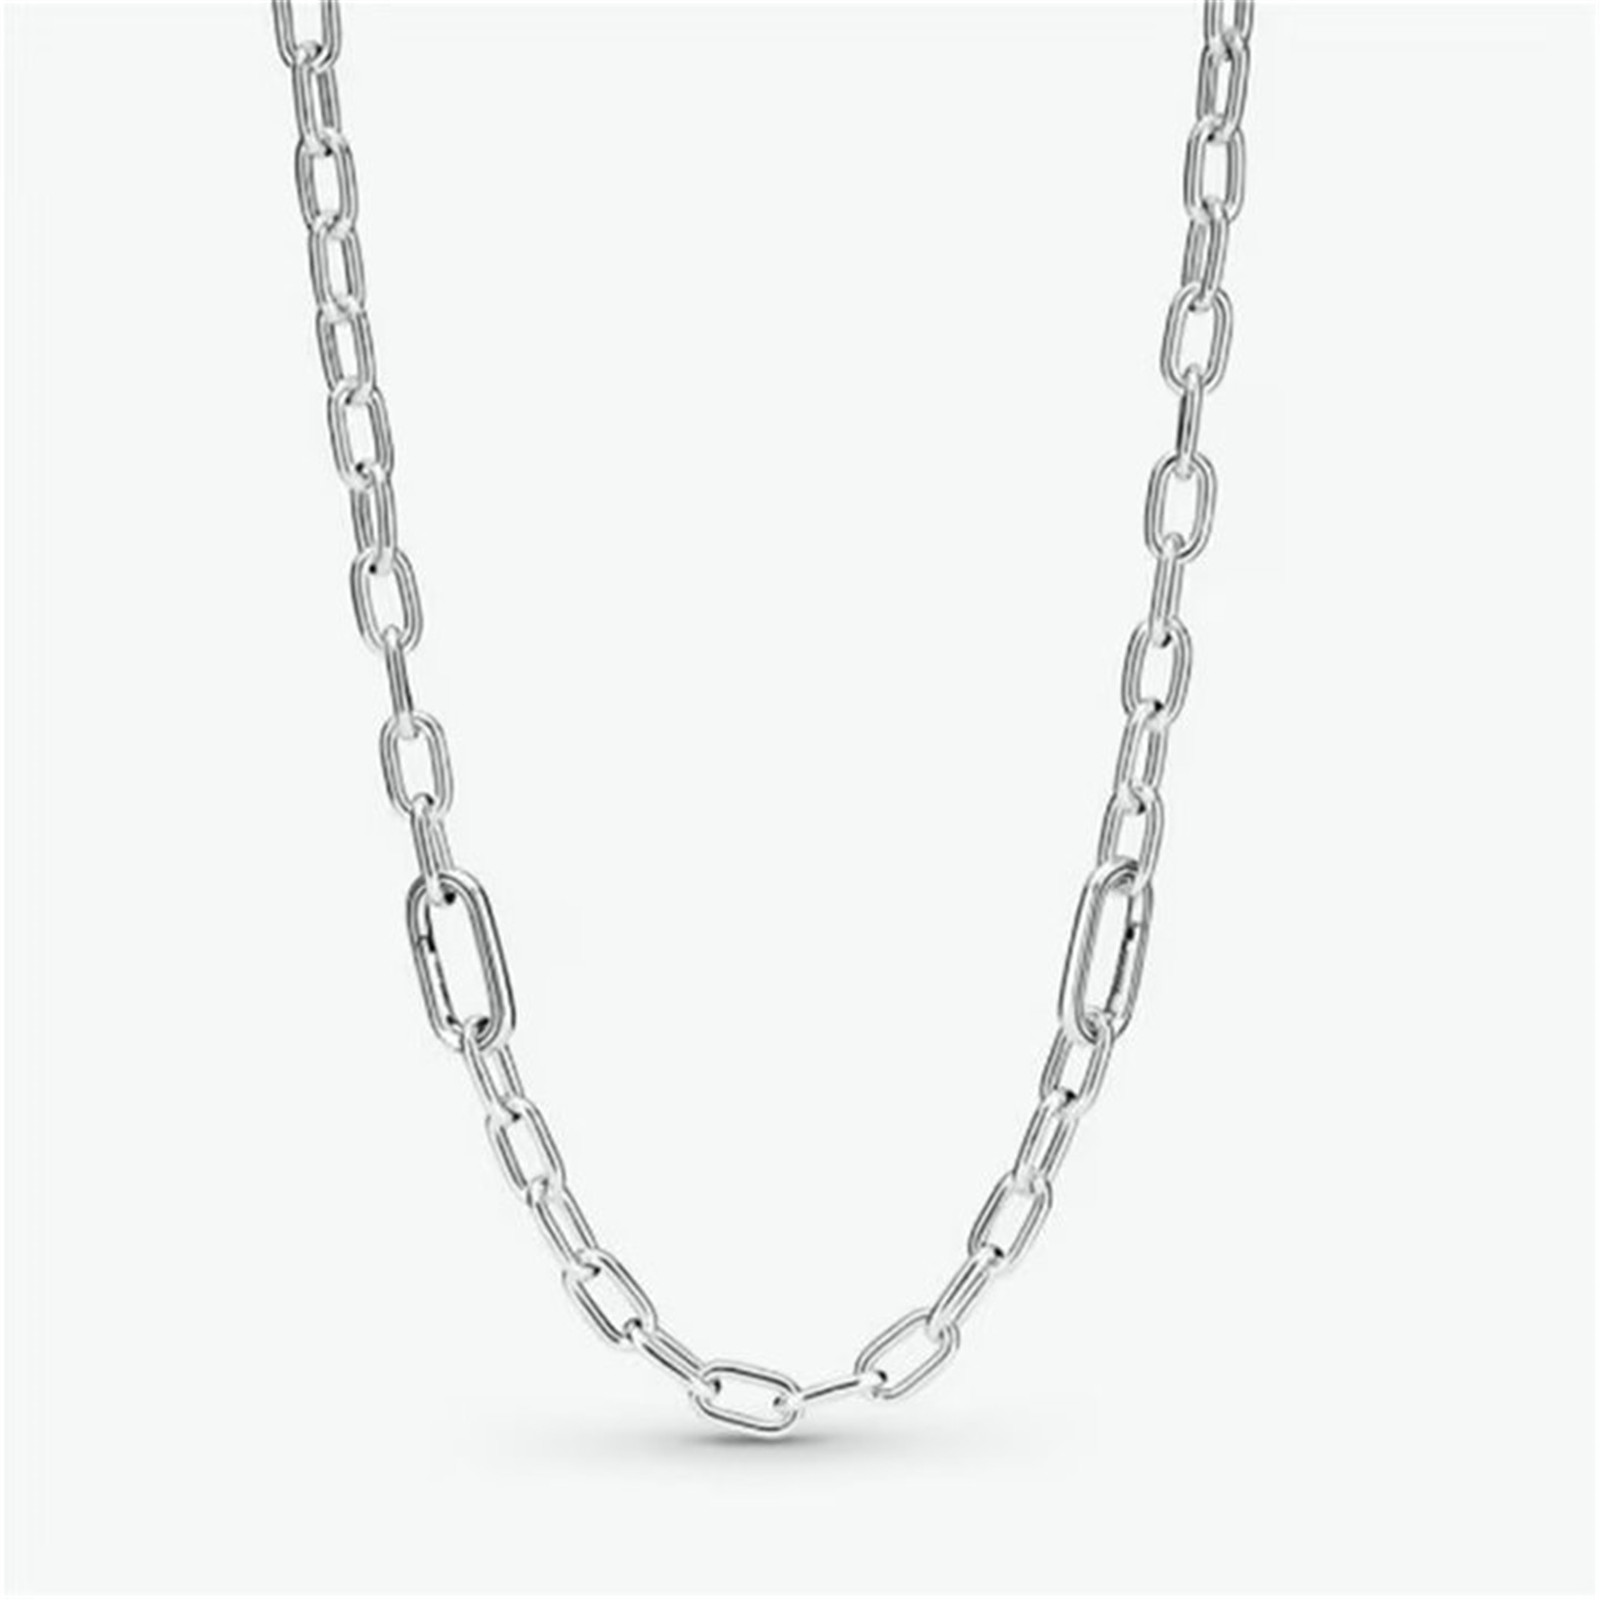 925Sterling Silver Pandora Charm Necklace, Minimalist Necklace,Gift For Her  - $21.99